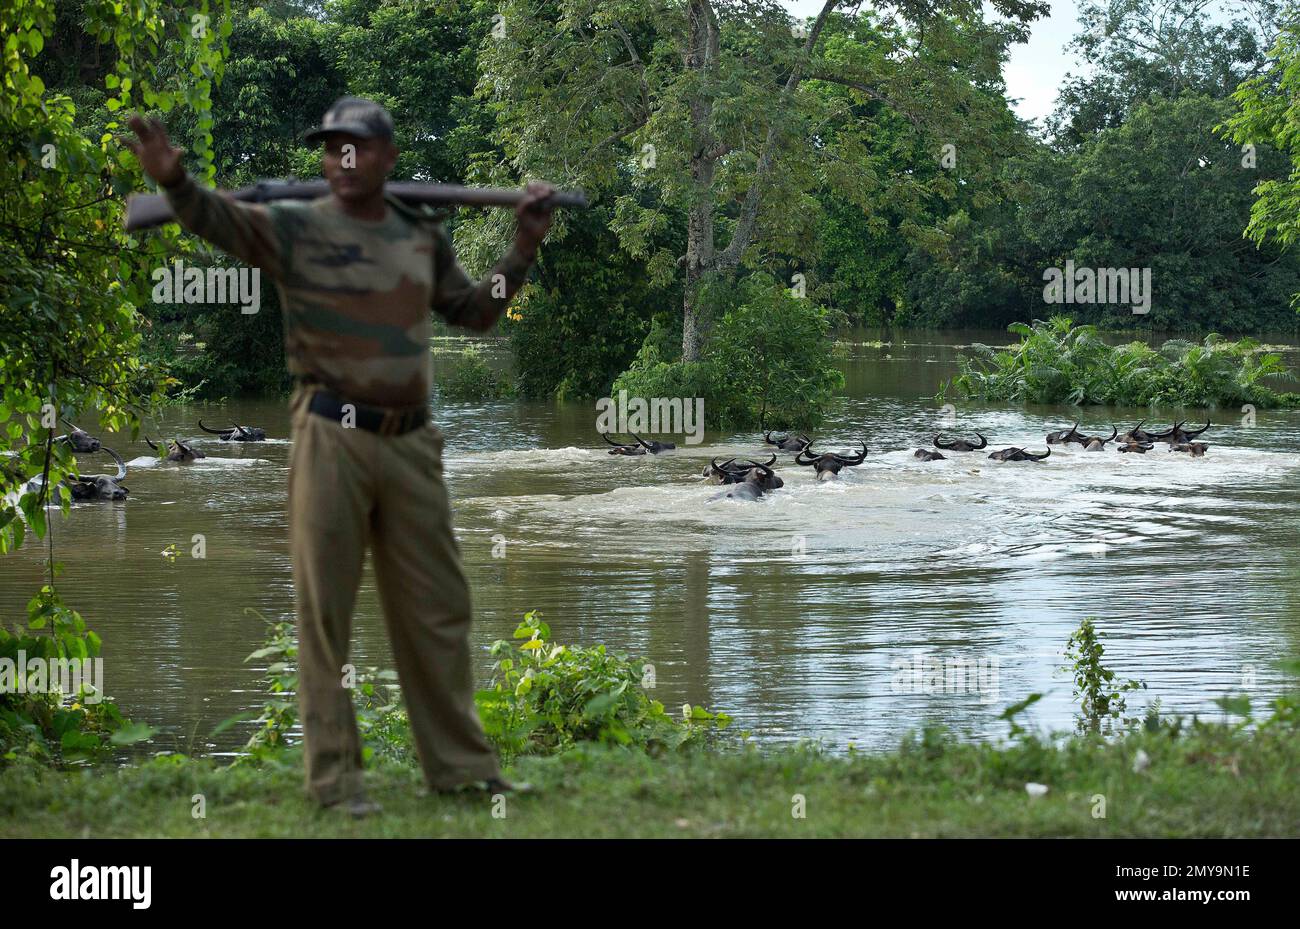 A forest gurad stops vehicles on a highway as wild buffalos swim in flood waters in search of high land in Kaziranga national park, east of Gauhati, northeastern Assam state, India, Tuesday, July 26, 2016. Heavy rains and floods have forced around 1.2 million to leave their water-logged homes. The Brahmaputra River and its tributaries were overflowing their banks in 18 of the state's districts, washing away roads and highways and toppling power pylons. (AP Photo/Anupam Nath) Banque D'Images